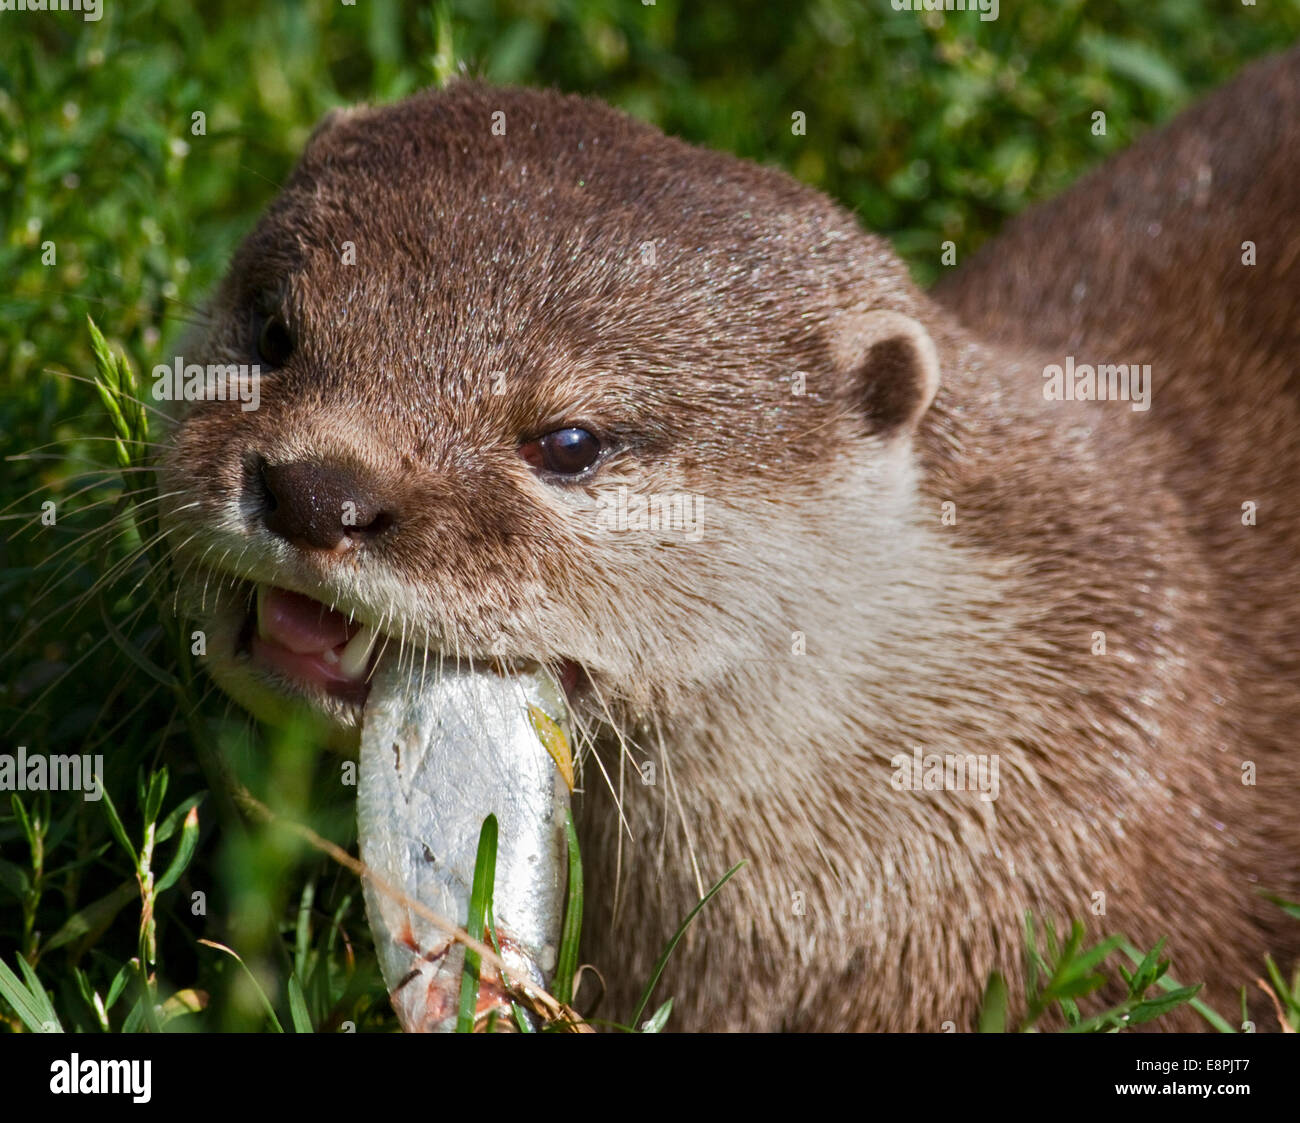 North American River Otter (lontra canadensis) eating fish Stock Photo